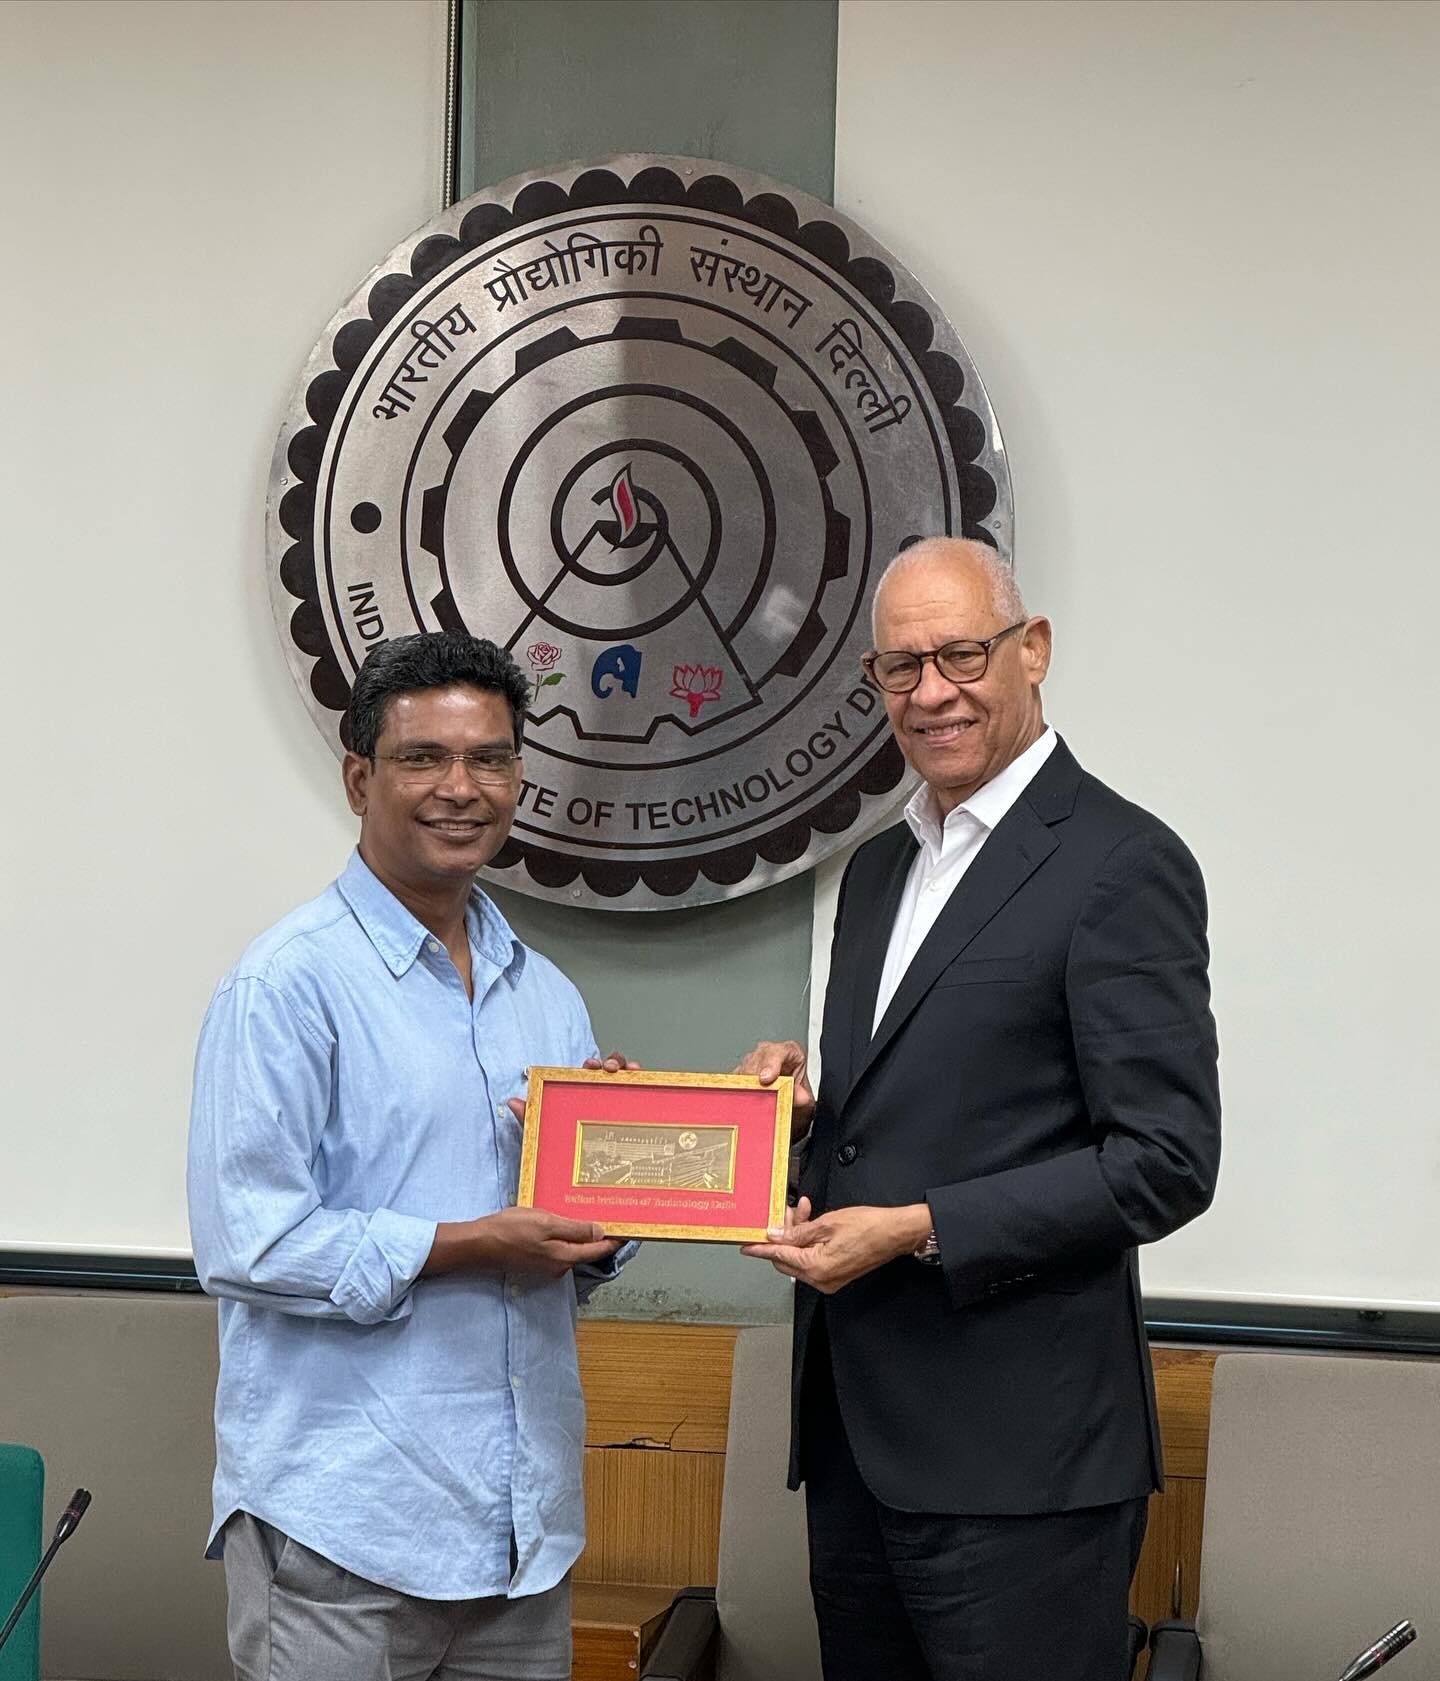 Vice Minister of the @presidenciard Jos&eacute; Ram&oacute;n Holguin Brito started his agenda in New Delhi with a visit to Indian Institute of Technology New Delhi where he held conversations on academic exchange initiatives and visited the IIT Delhi